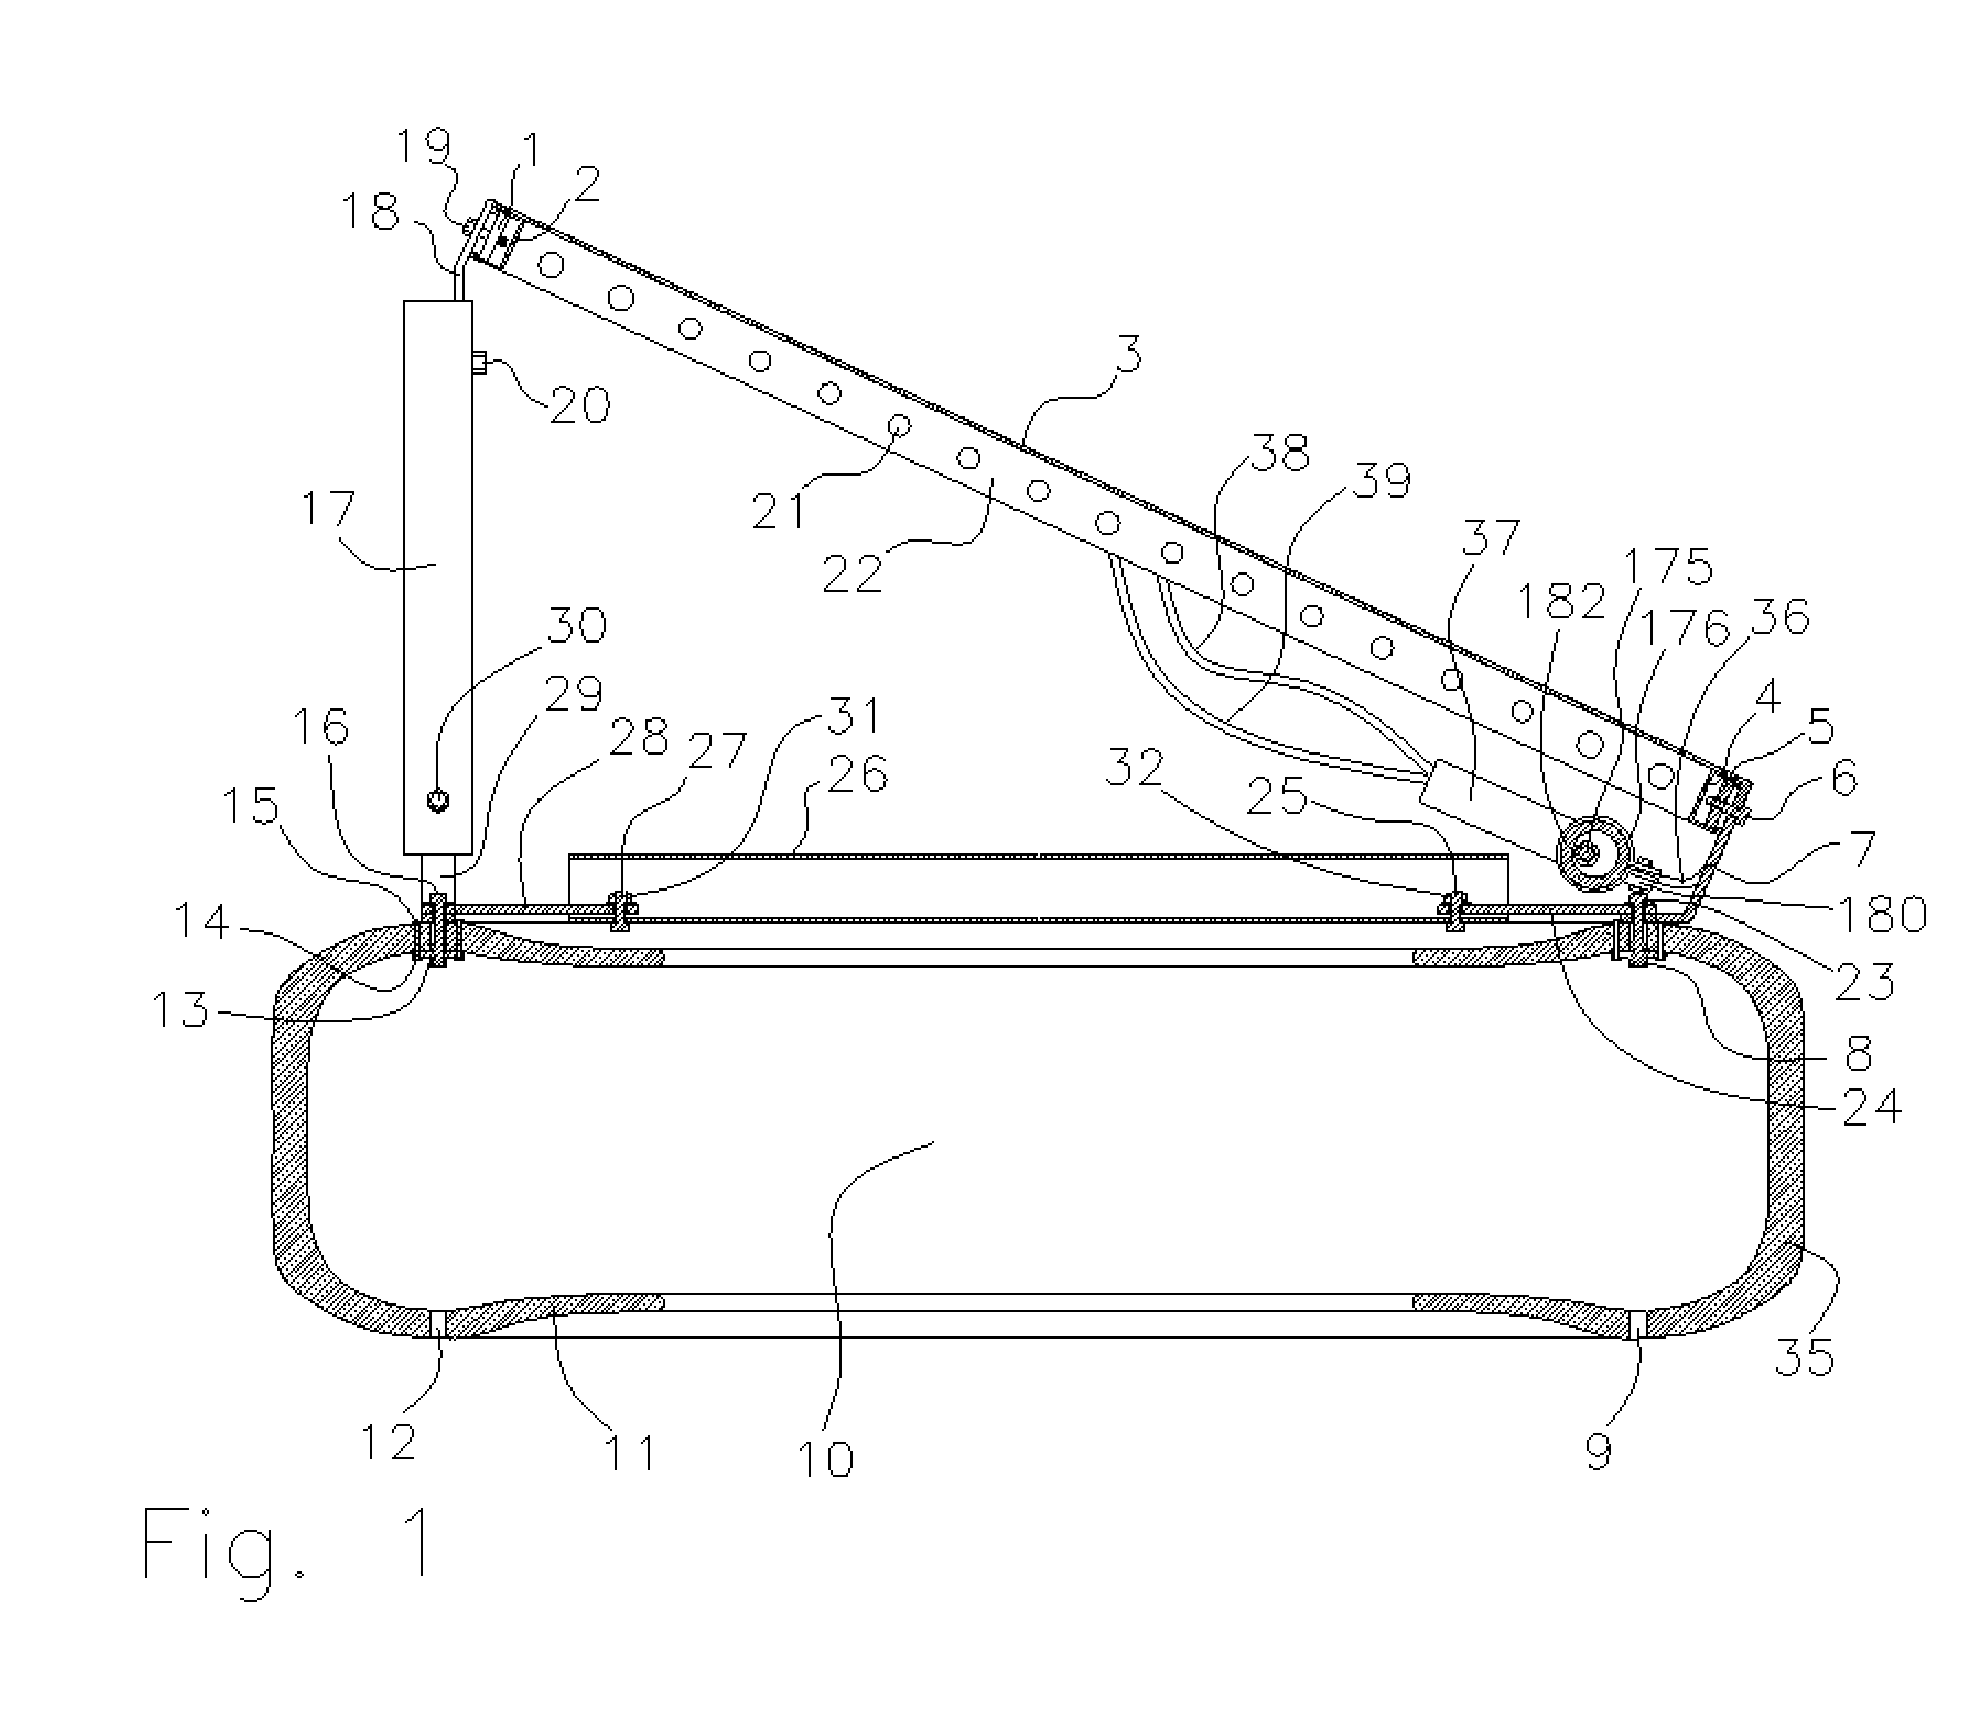 Photovoltaic Module Mounting to Rubber Tires